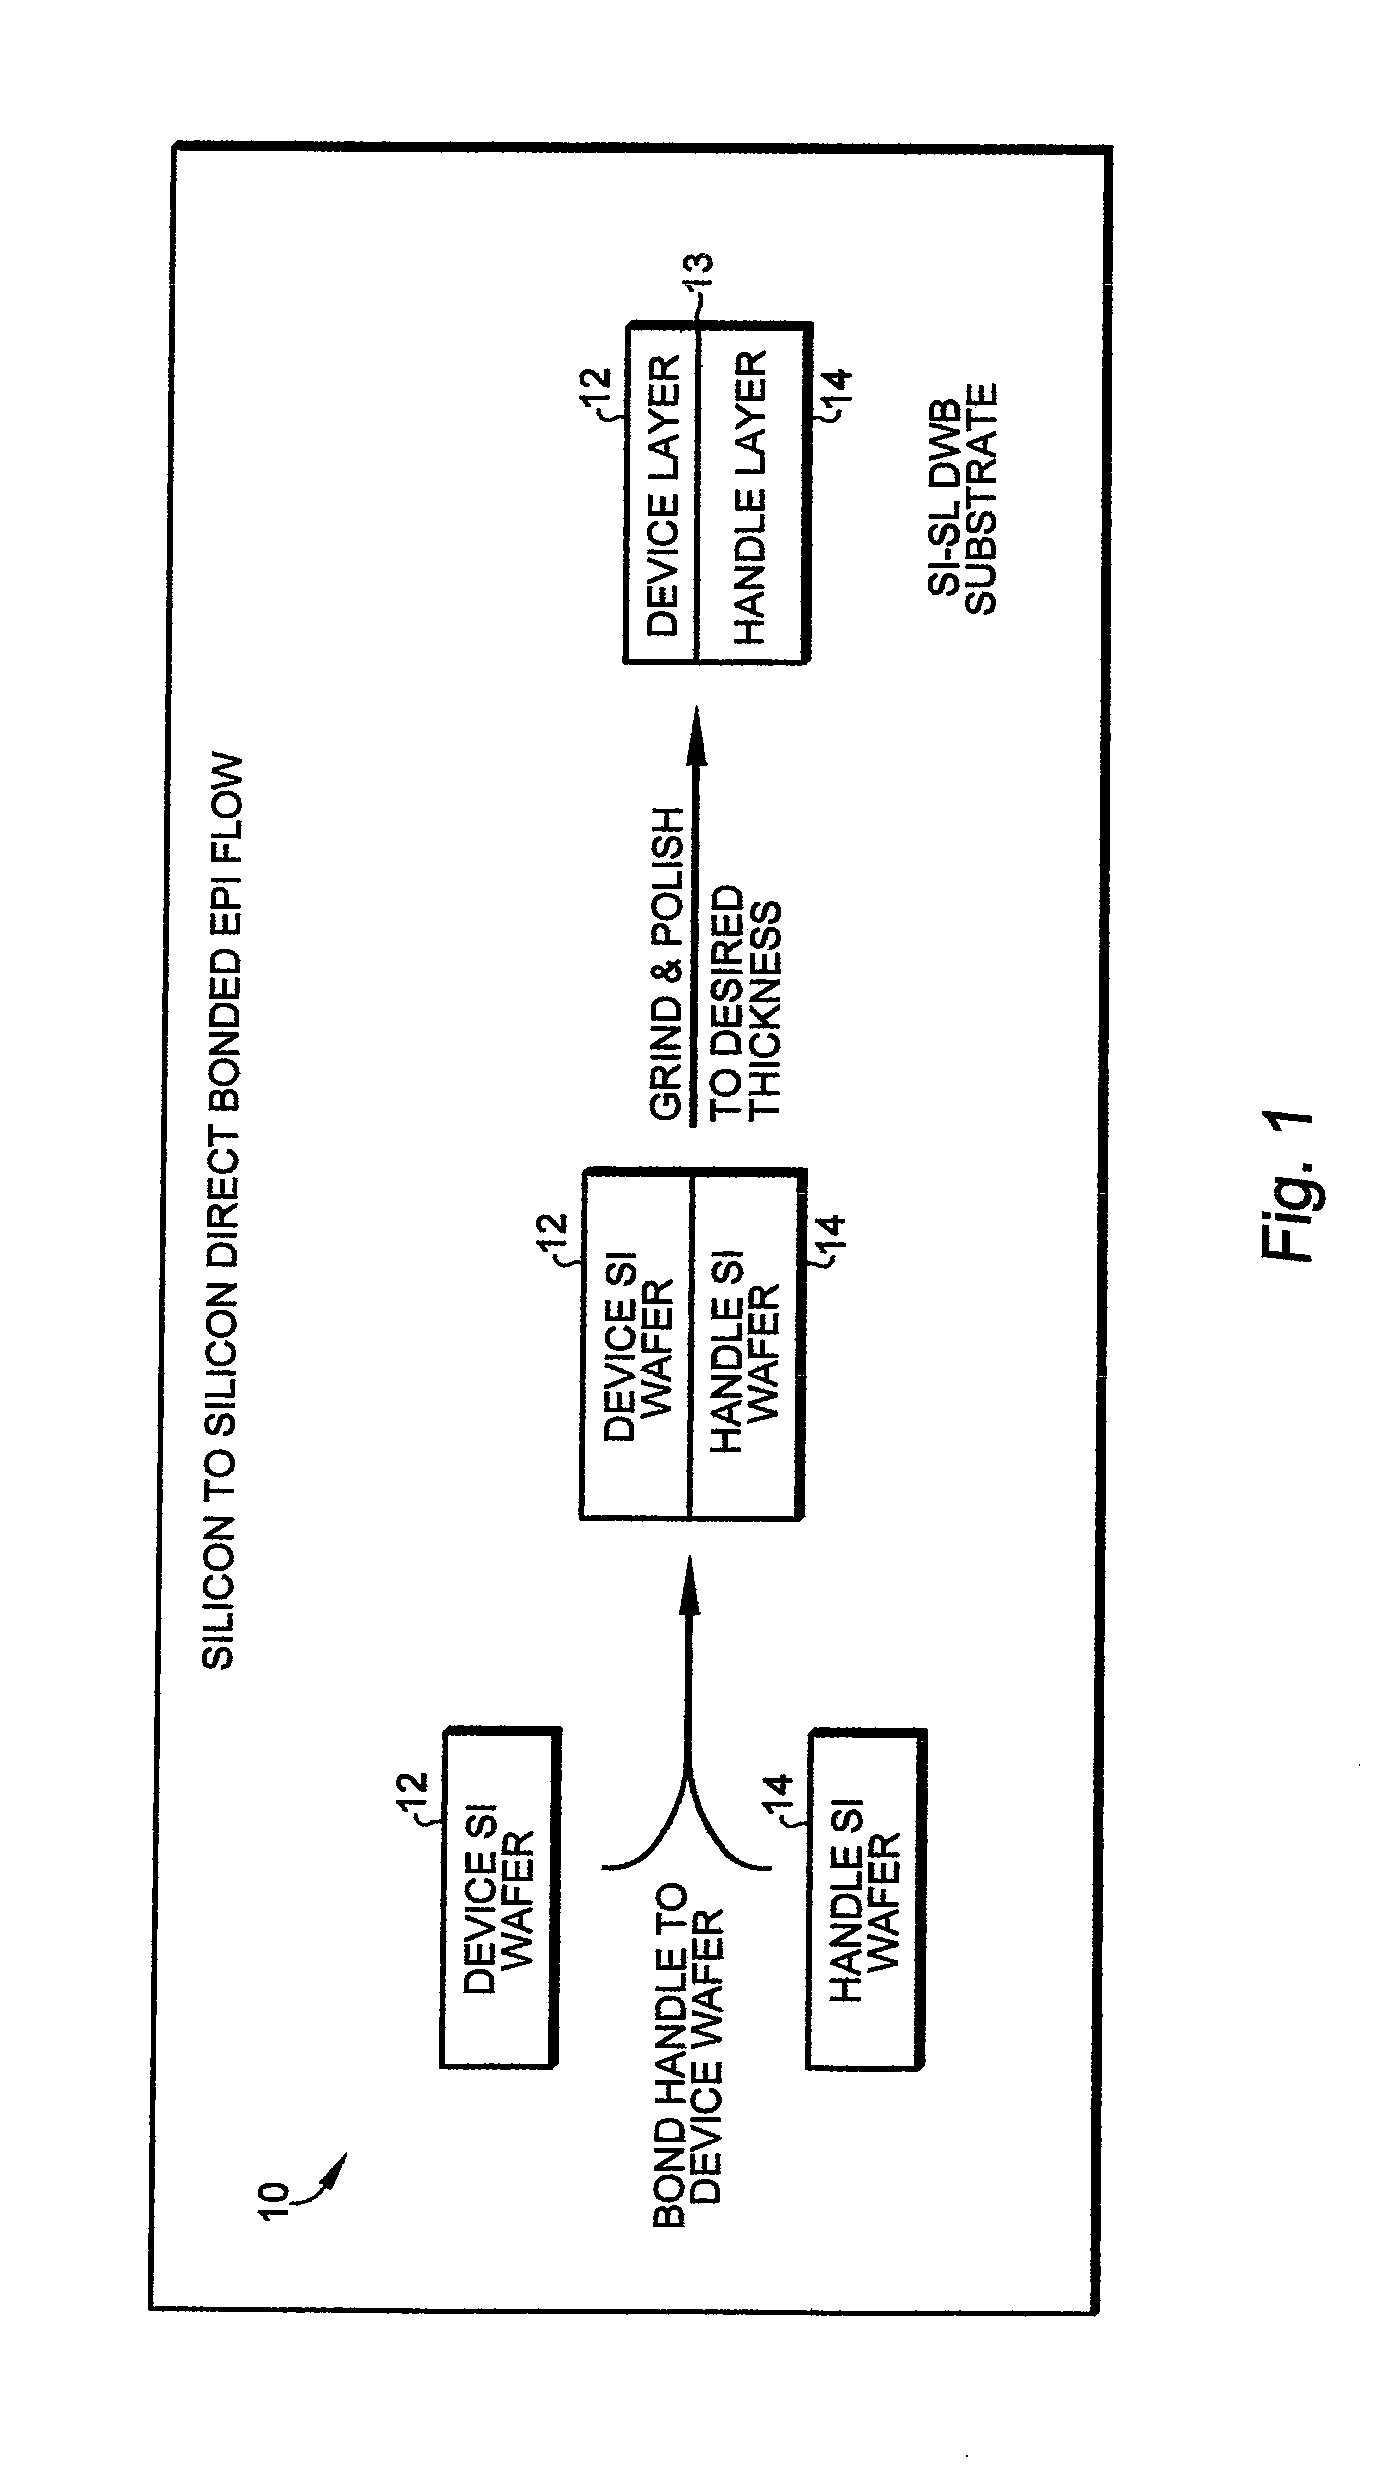 Wafer structure for electronic integrated circuit manufacturing